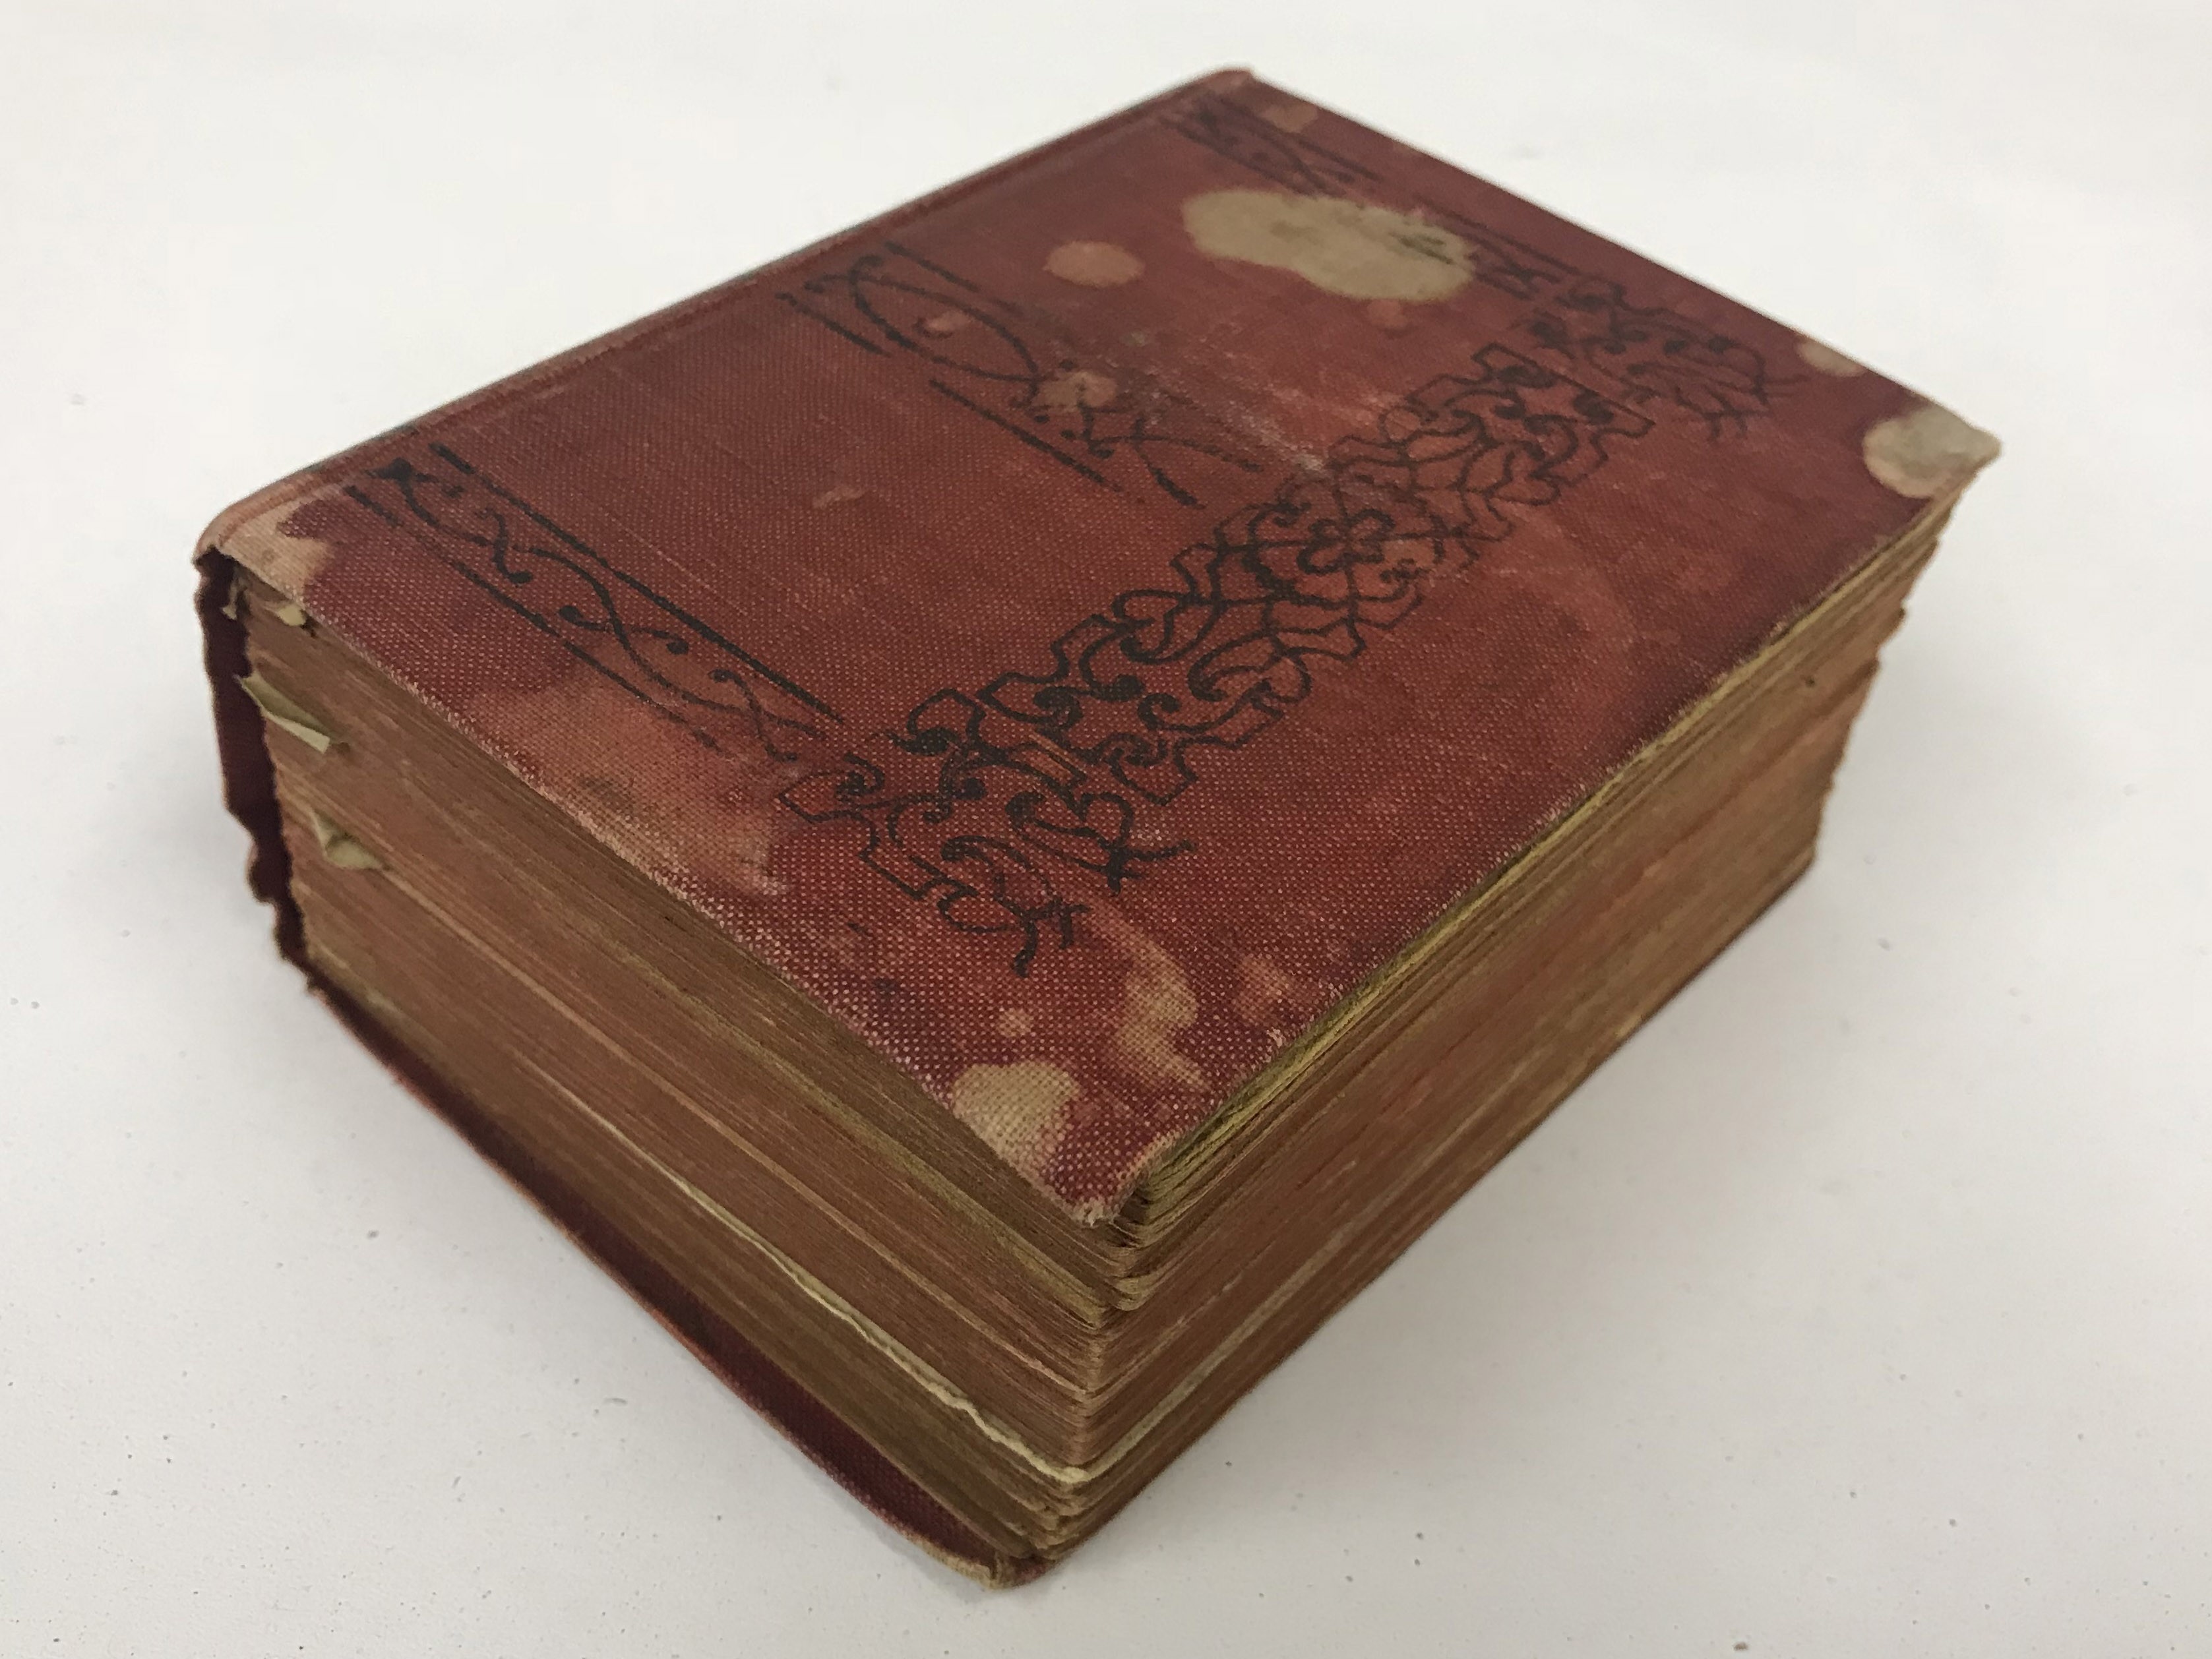 TWO DIFFERENT EDITIONS OF THE WORKS OF ARISTOTLE, FAMILY PHYSICIAN - Image 10 of 13